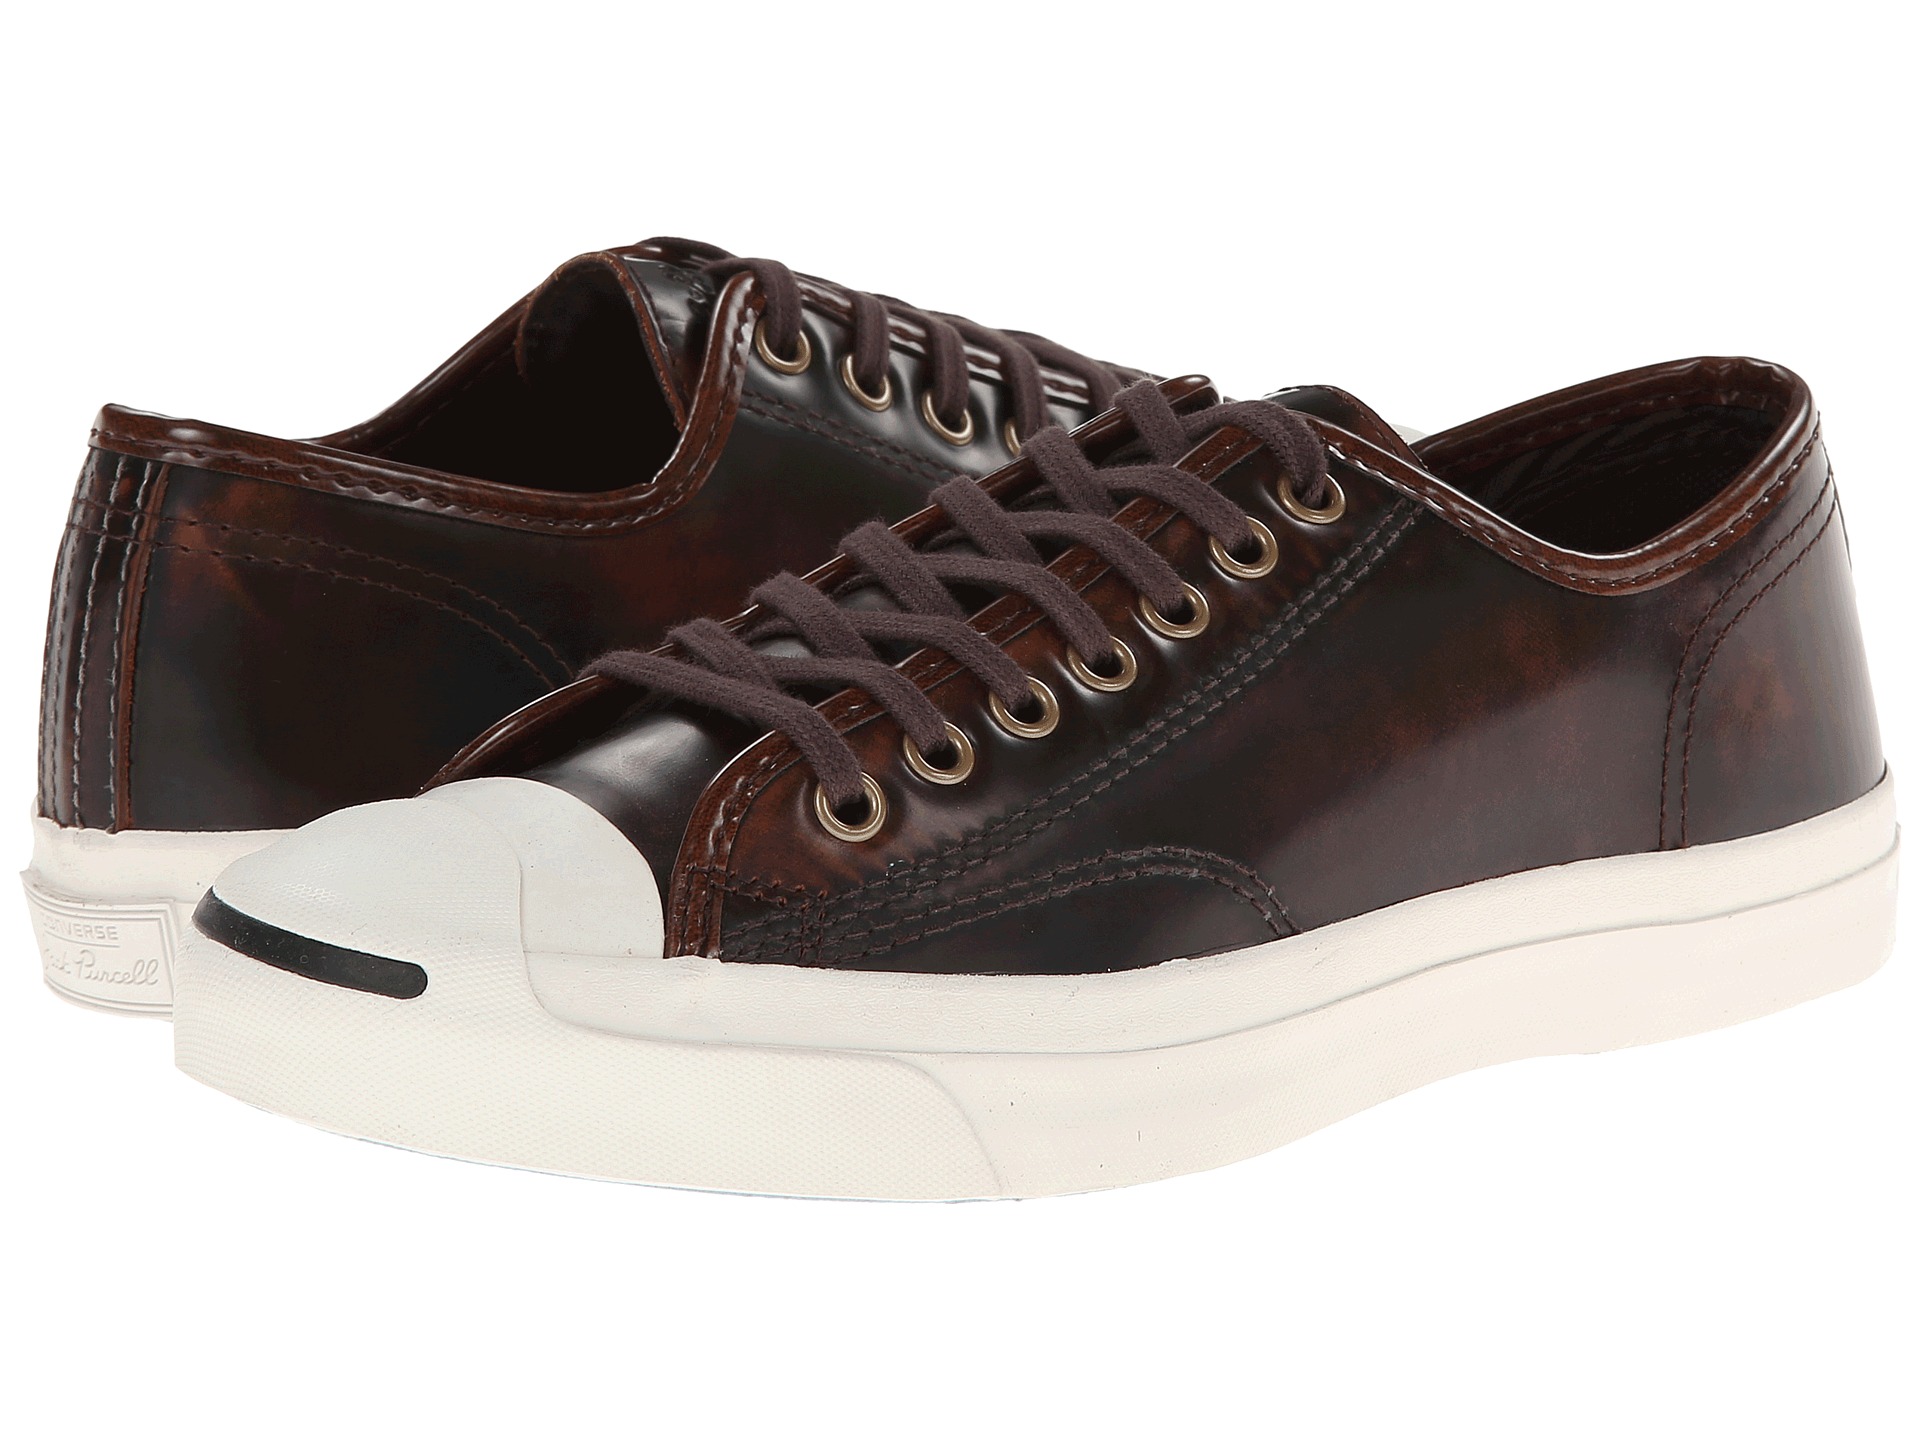 Converse Jack Purcell Box Leather Jack Auburn Egret | Shipped Free at ...